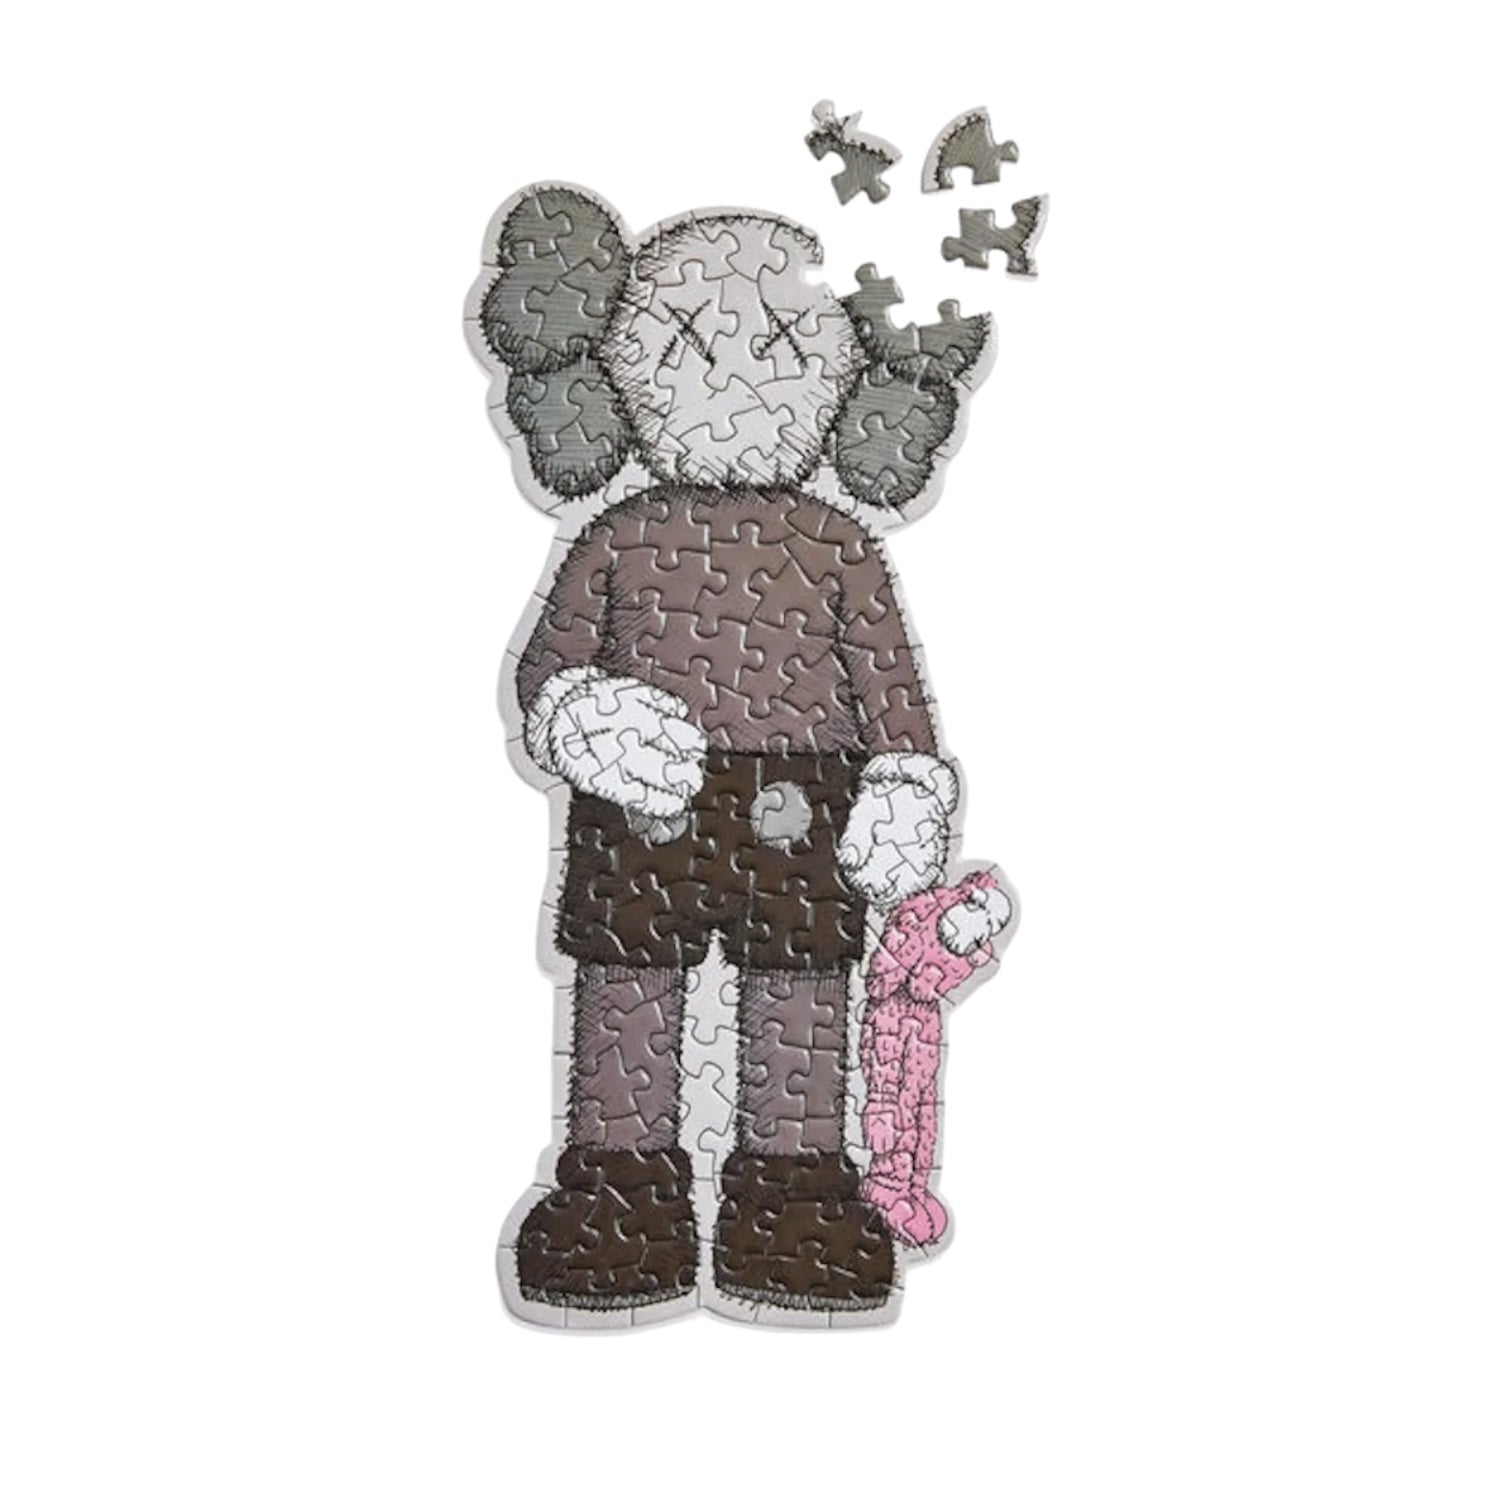 Kaws Share Small Jigsaw Puzzle (100 pieces)